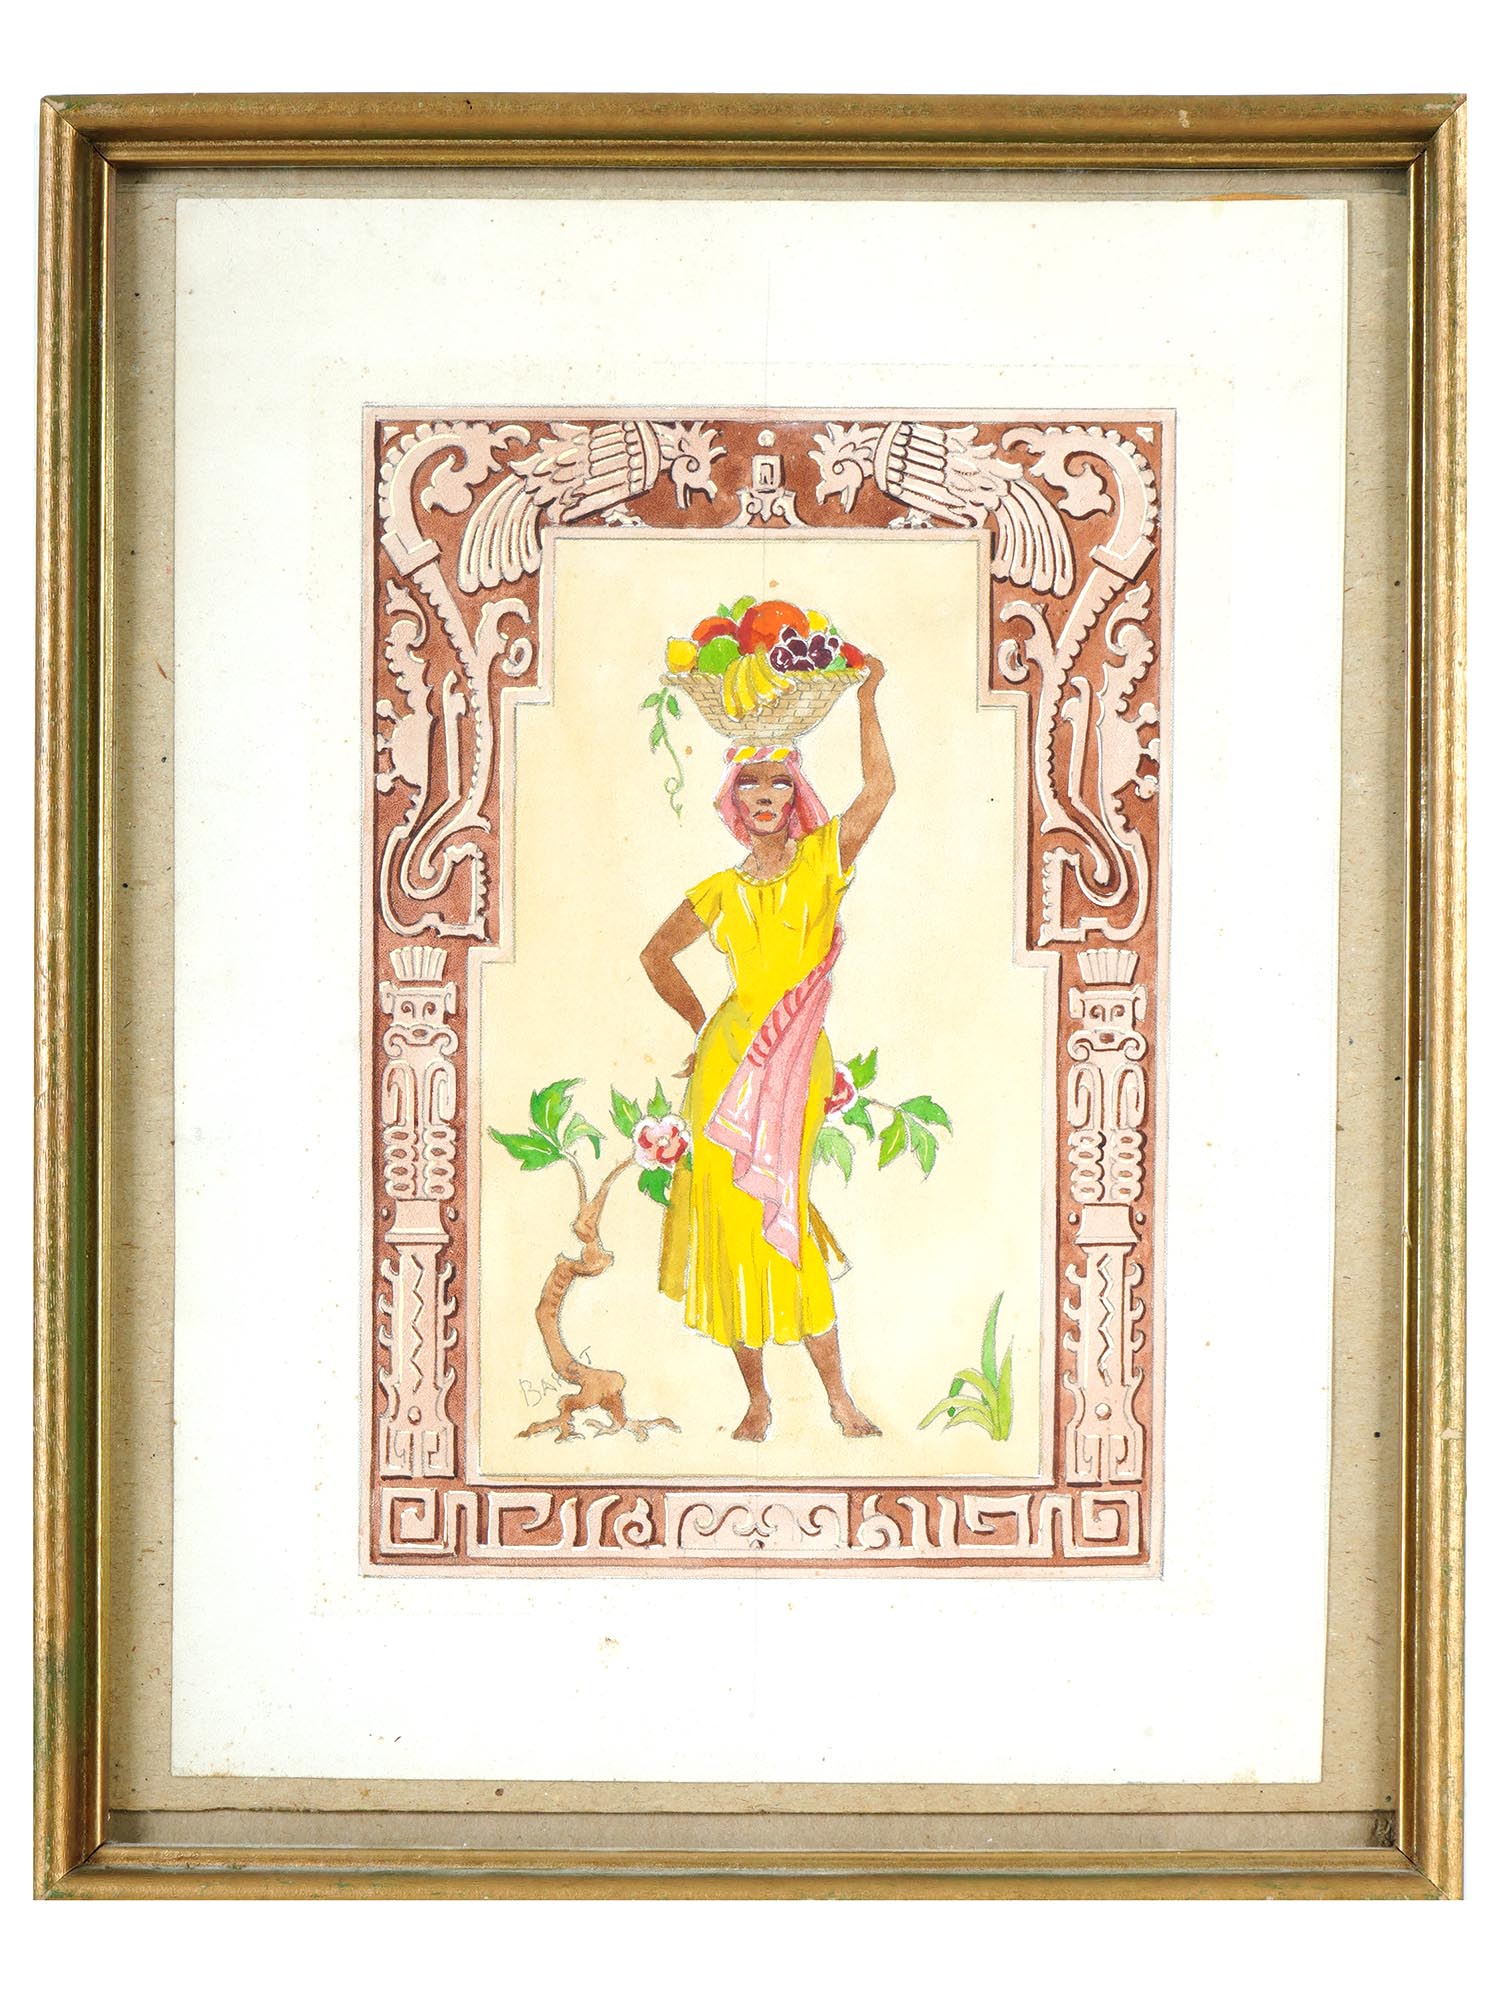 ANTIQUE RUSSIAN WATERCOLOR PAINTING BY LEON BAKST PIC-0